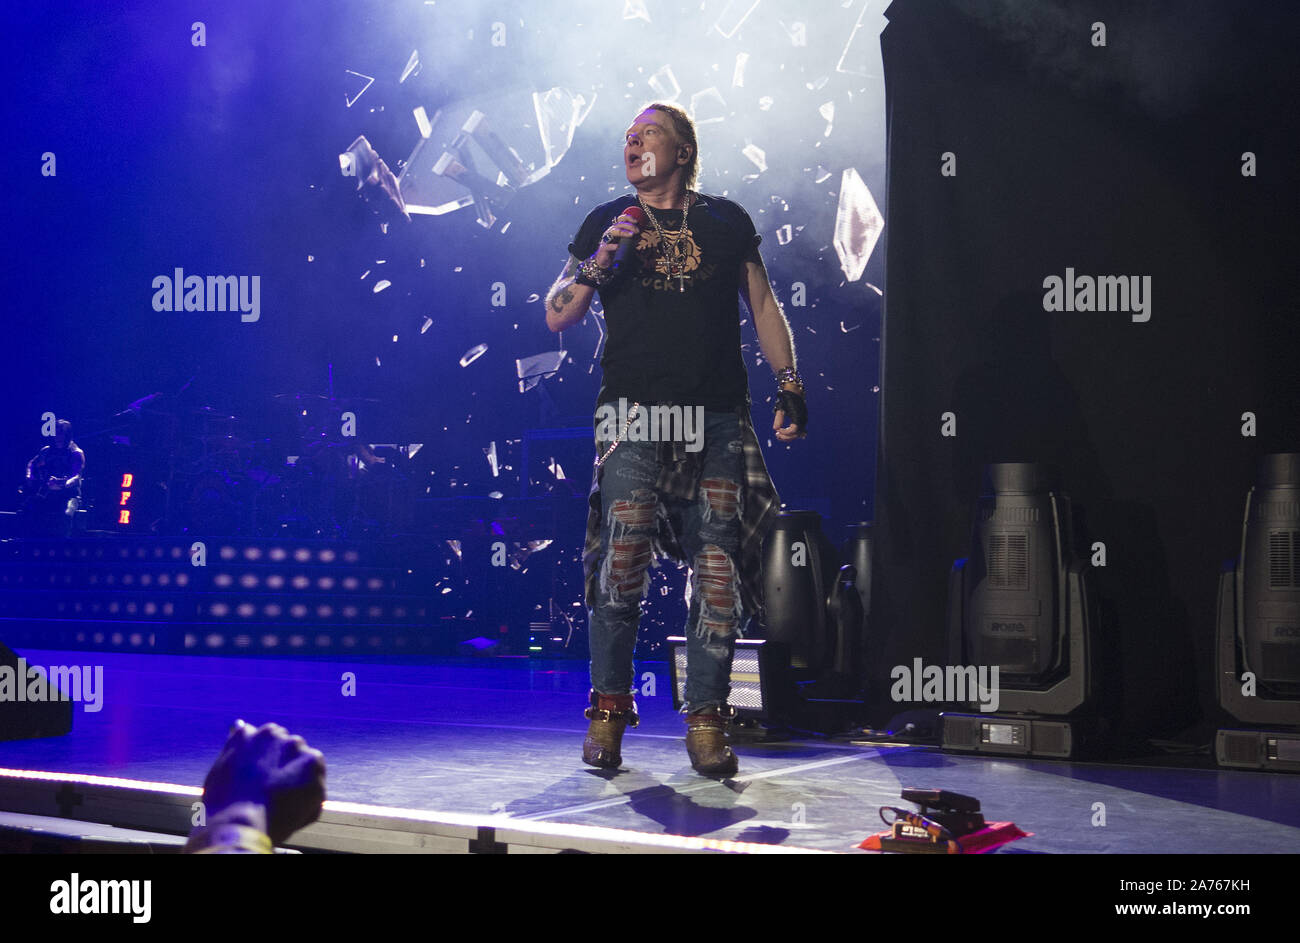 October 29, 2019, Salt Lake City, UT, USA: Singer Axl Rose of the rock band Guns N' Roses performs live onstage during a concert on their The Not in This Lifetime Tour at the Vivint Smart Home Arena. (Credit Image: © KC Alfred/ZUMA Wire) Stock Photo